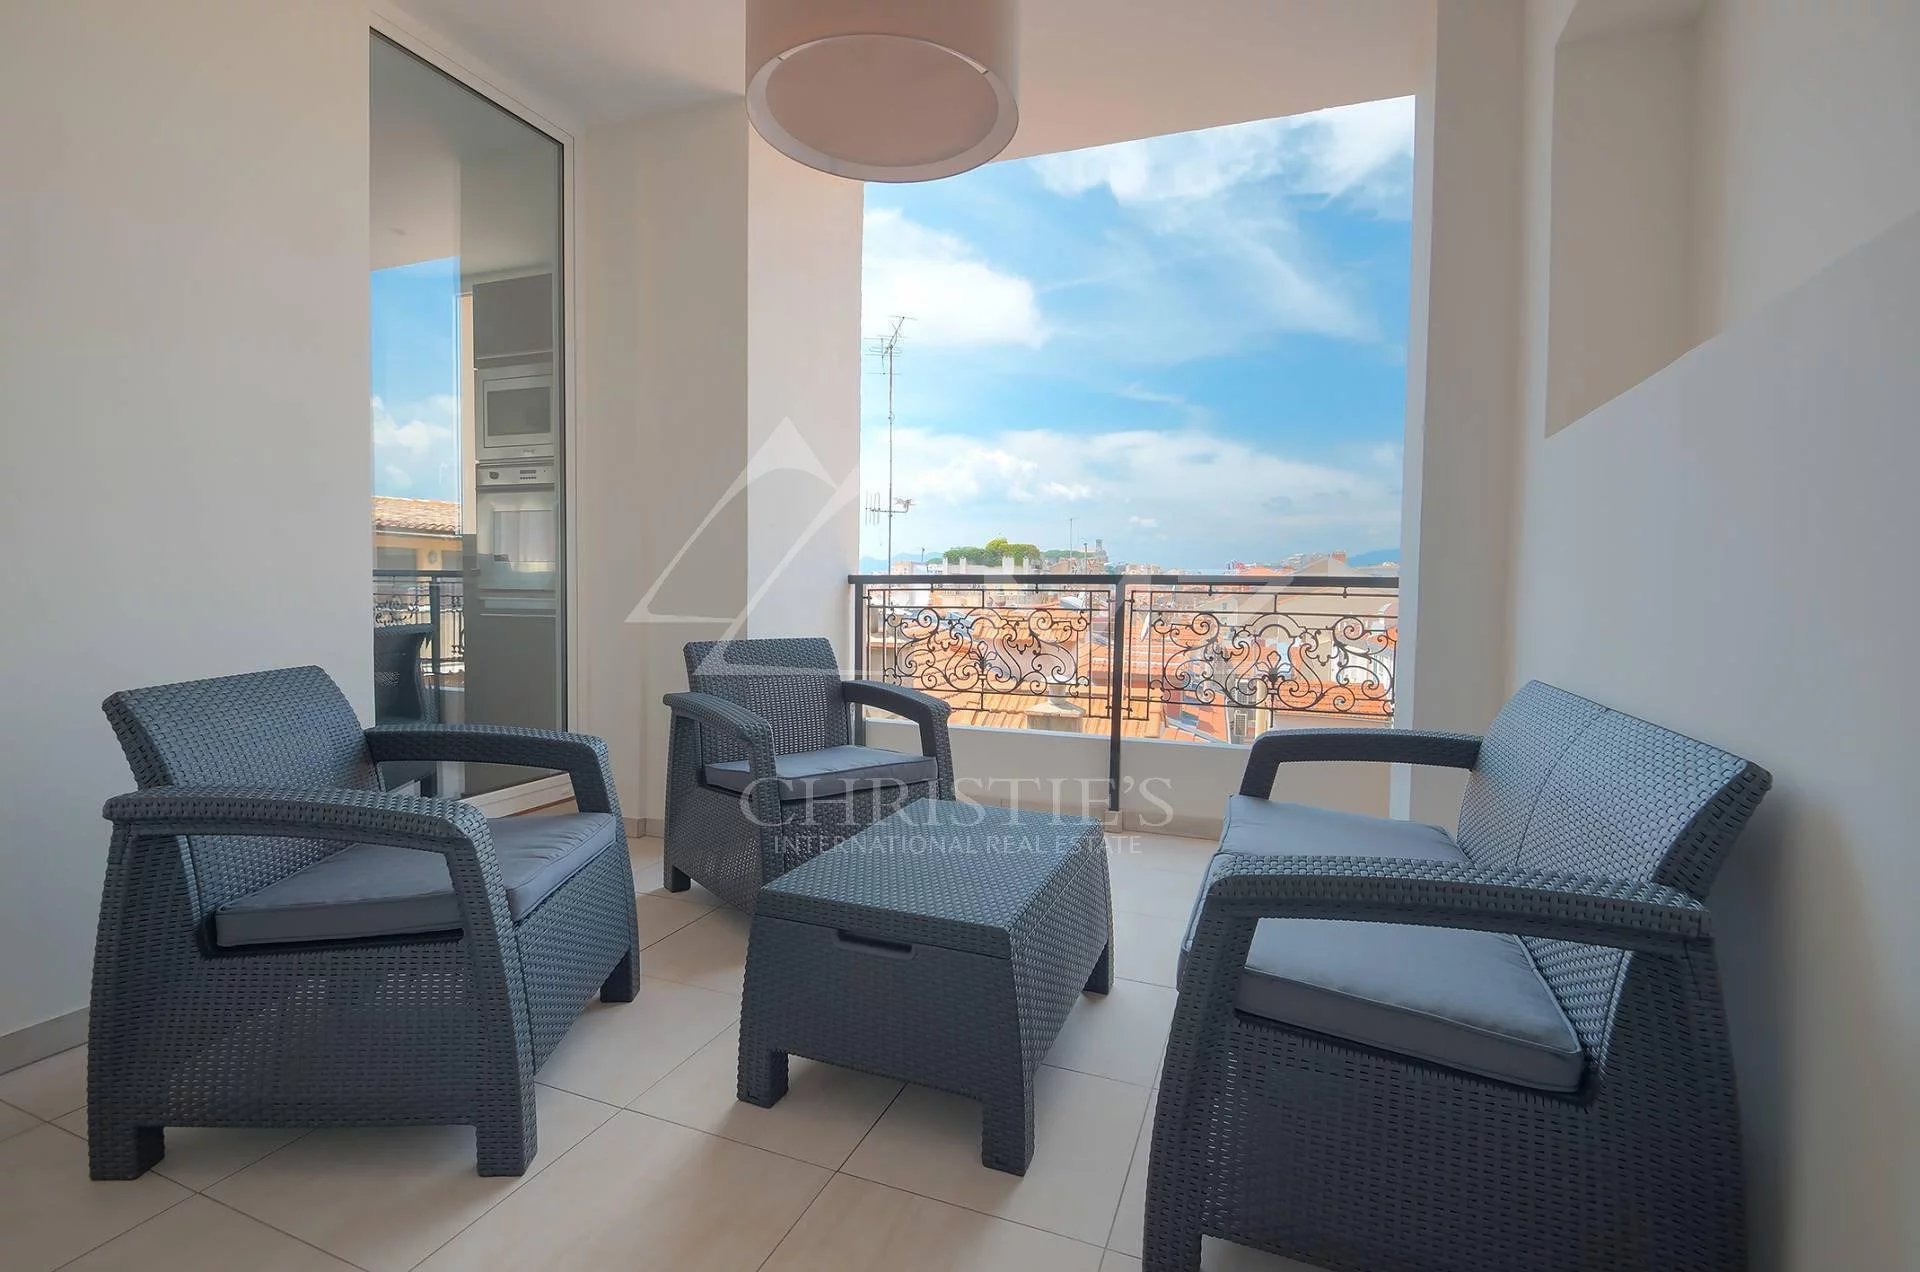 Cannes - Apartment close to the Croisette